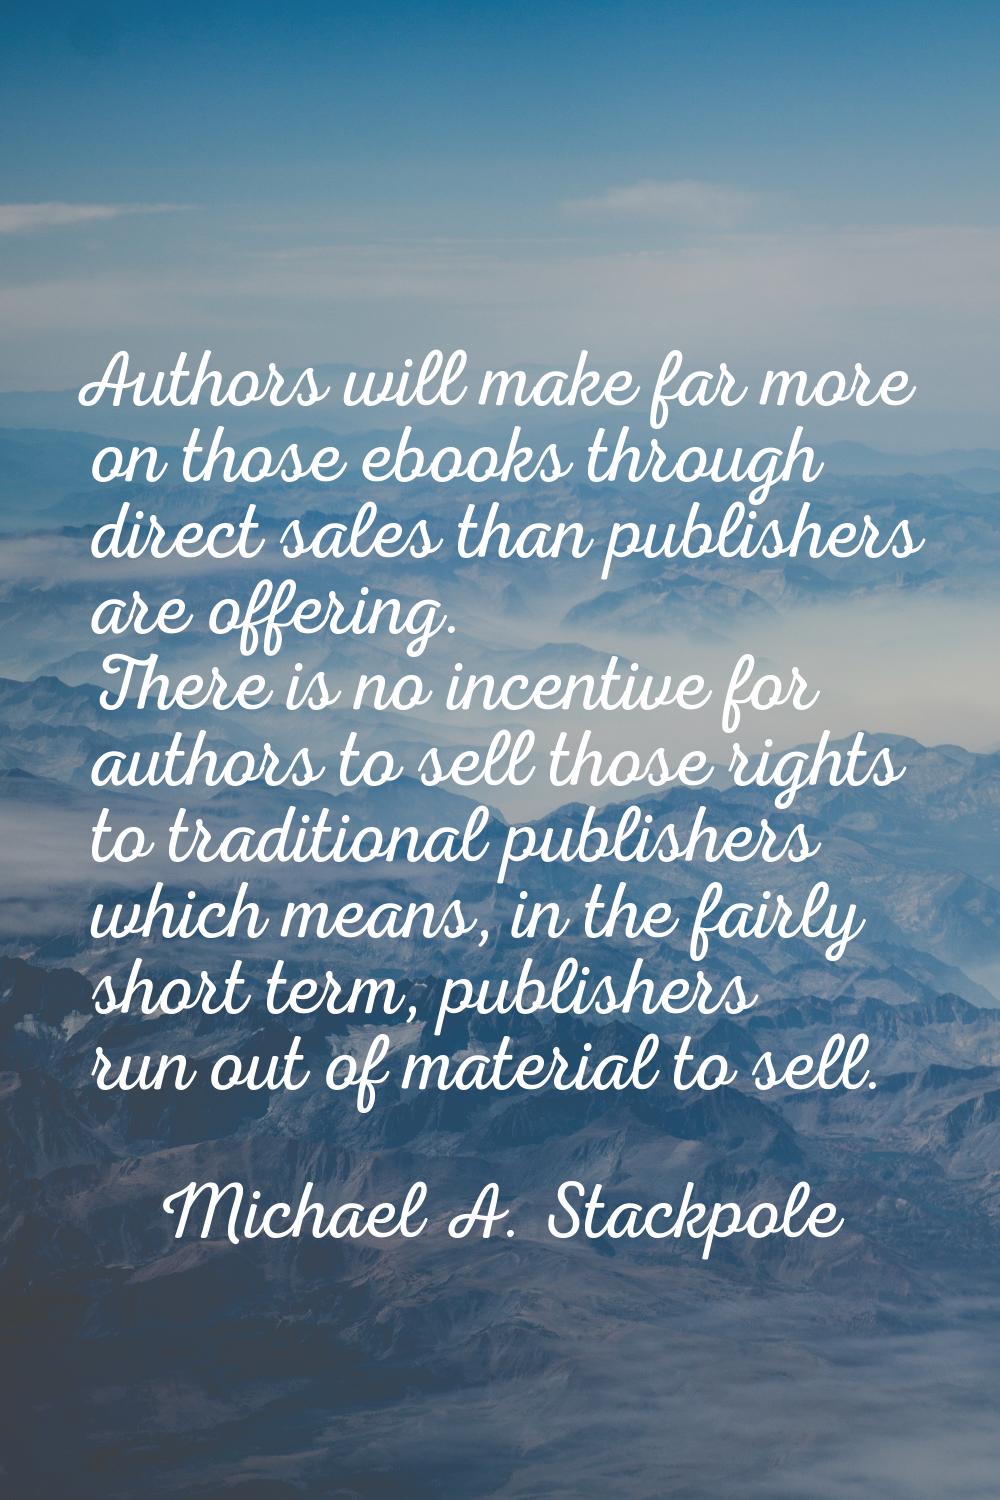 Authors will make far more on those ebooks through direct sales than publishers are offering. There